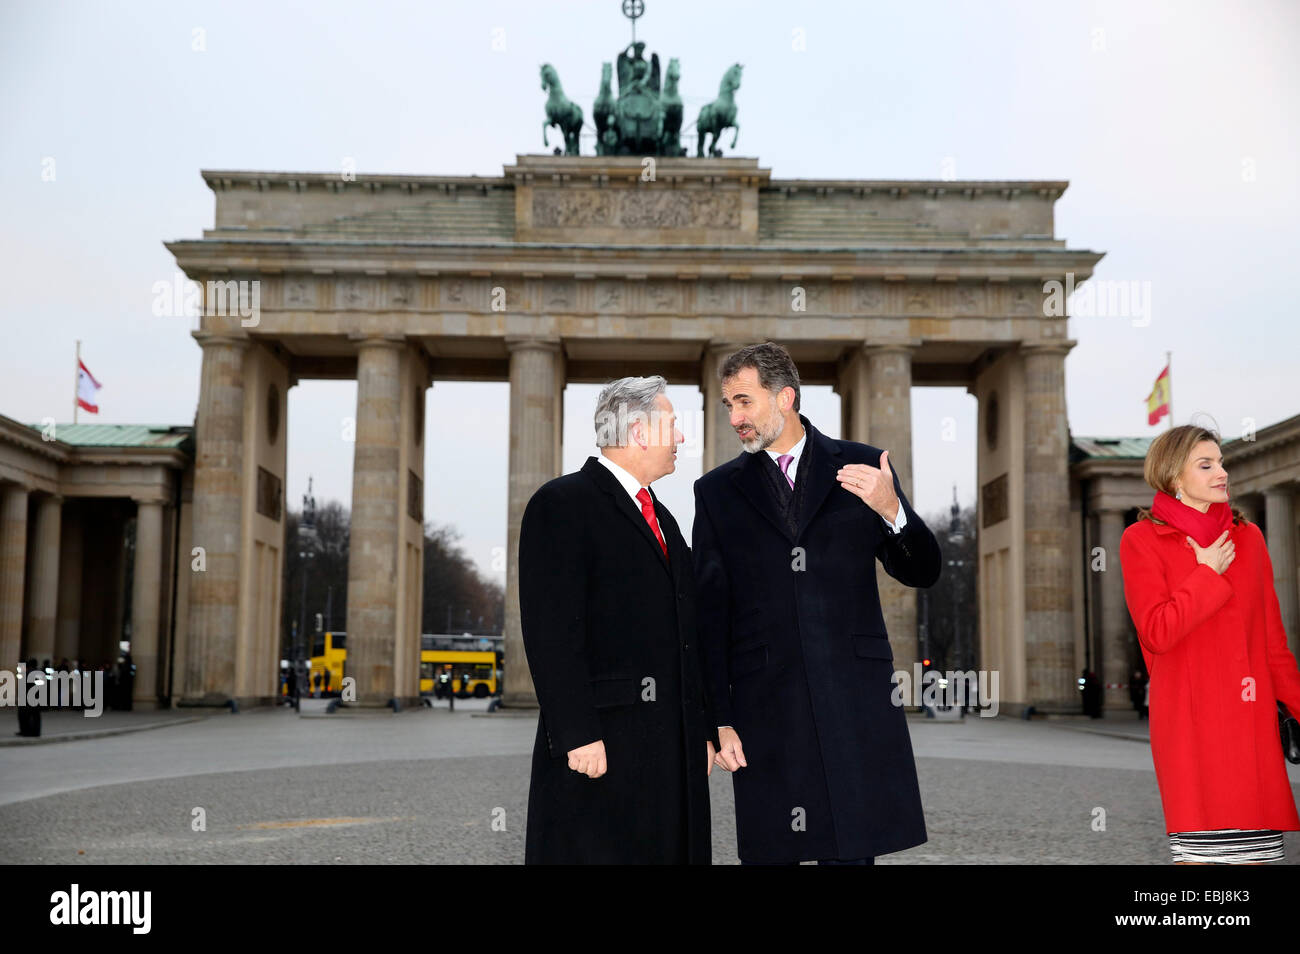 Berlin, Germany. 1st Dec, 2014. King Felipe of Spain visits the Brandenburger Tor with mayor Klaus Wowereit in Berlin, Germany, 1 December 2014. The King and Queen are in Germany for an official visit. © dpa/Alamy Live News Stock Photo